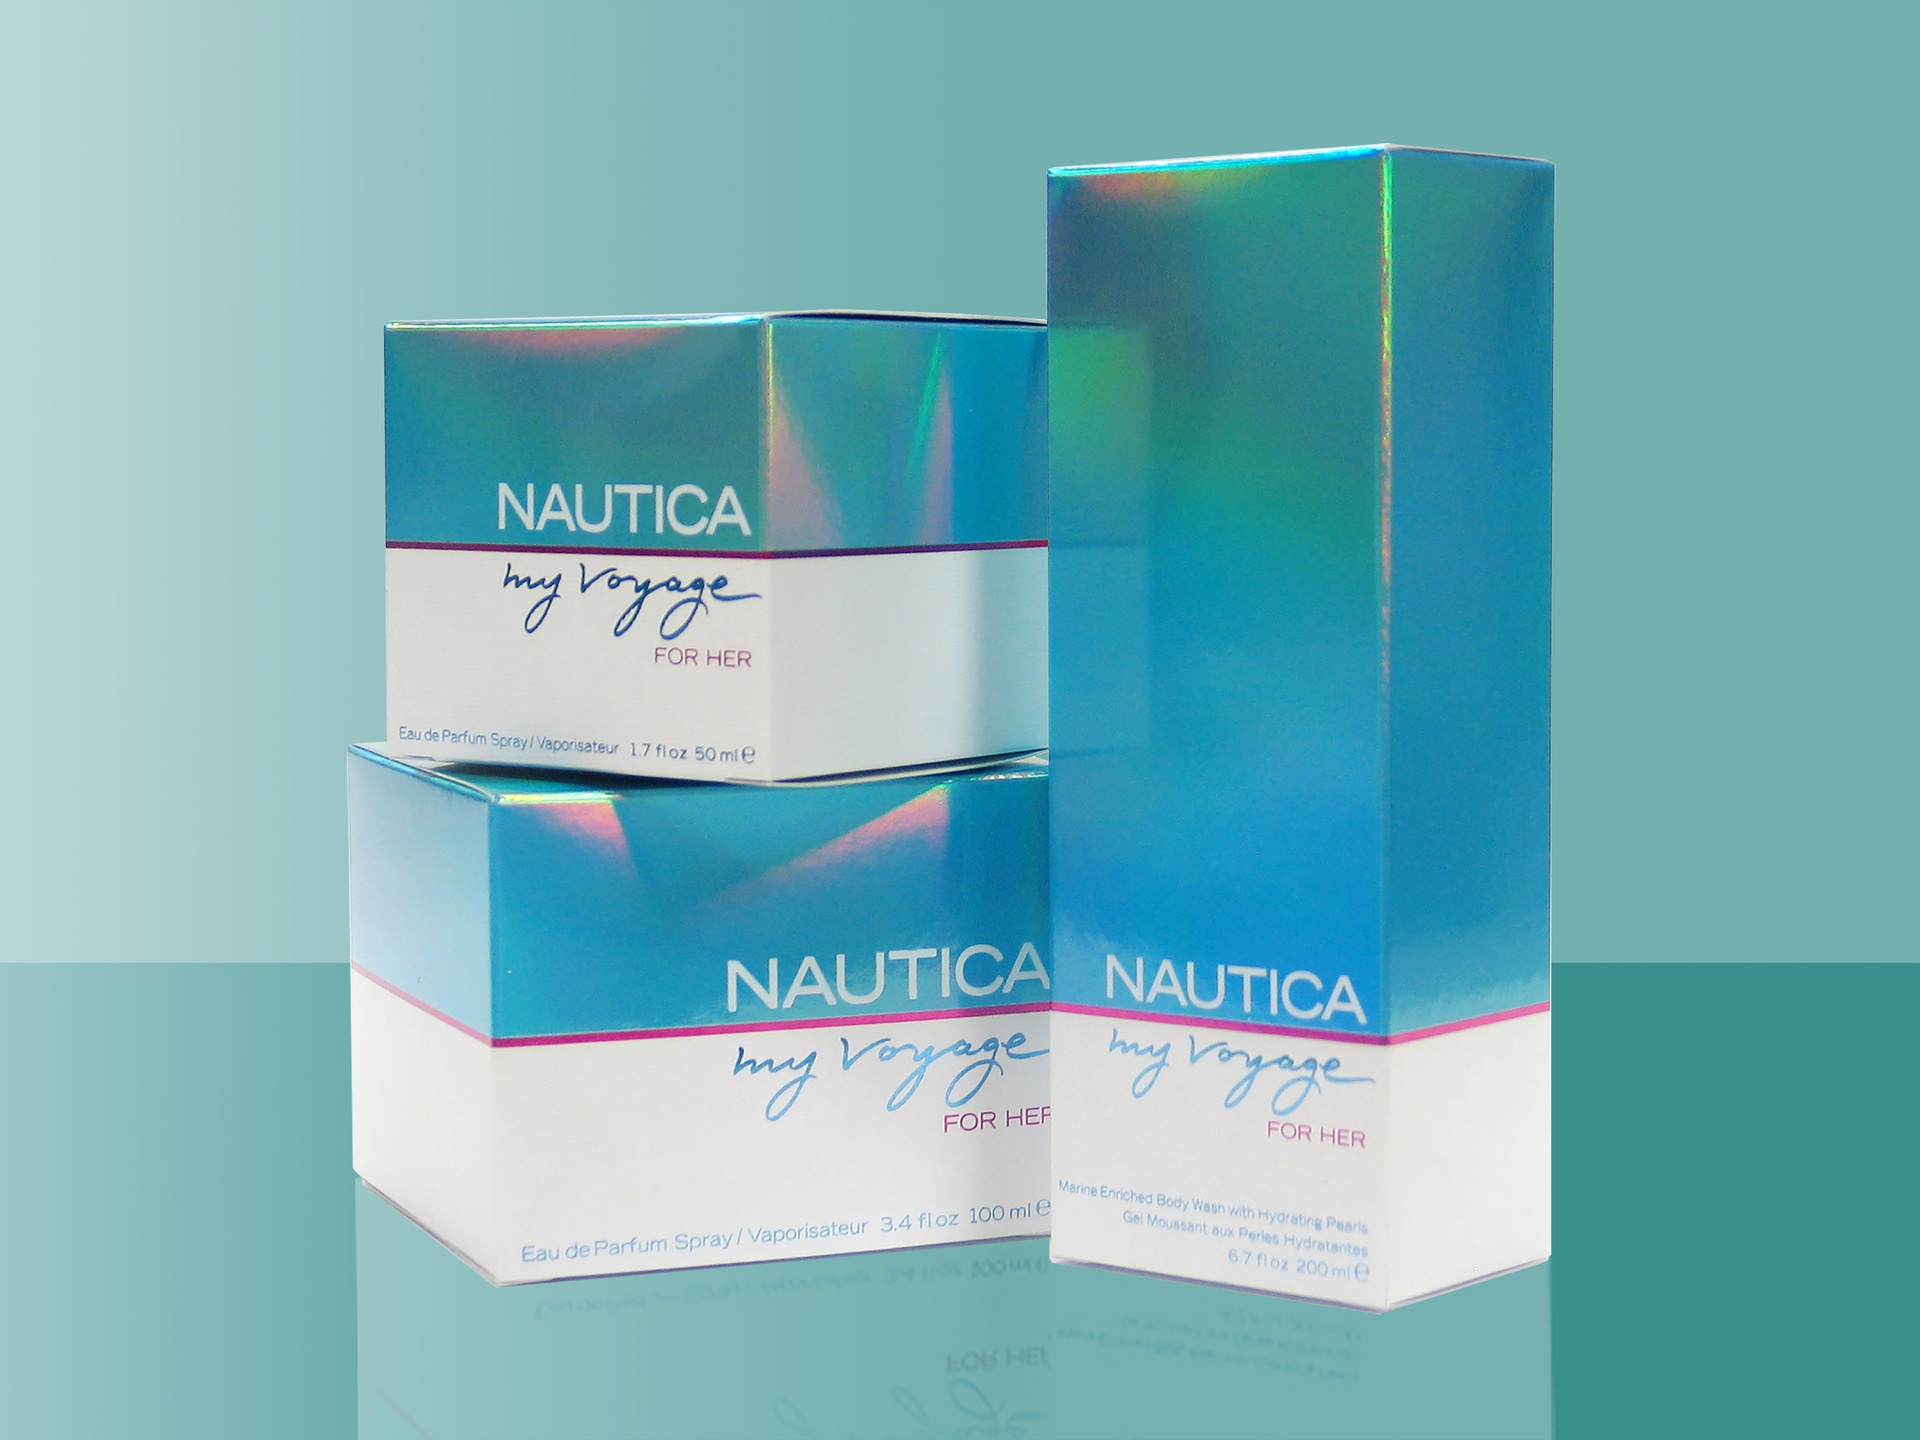 Nautica My Voyage For Her packaging